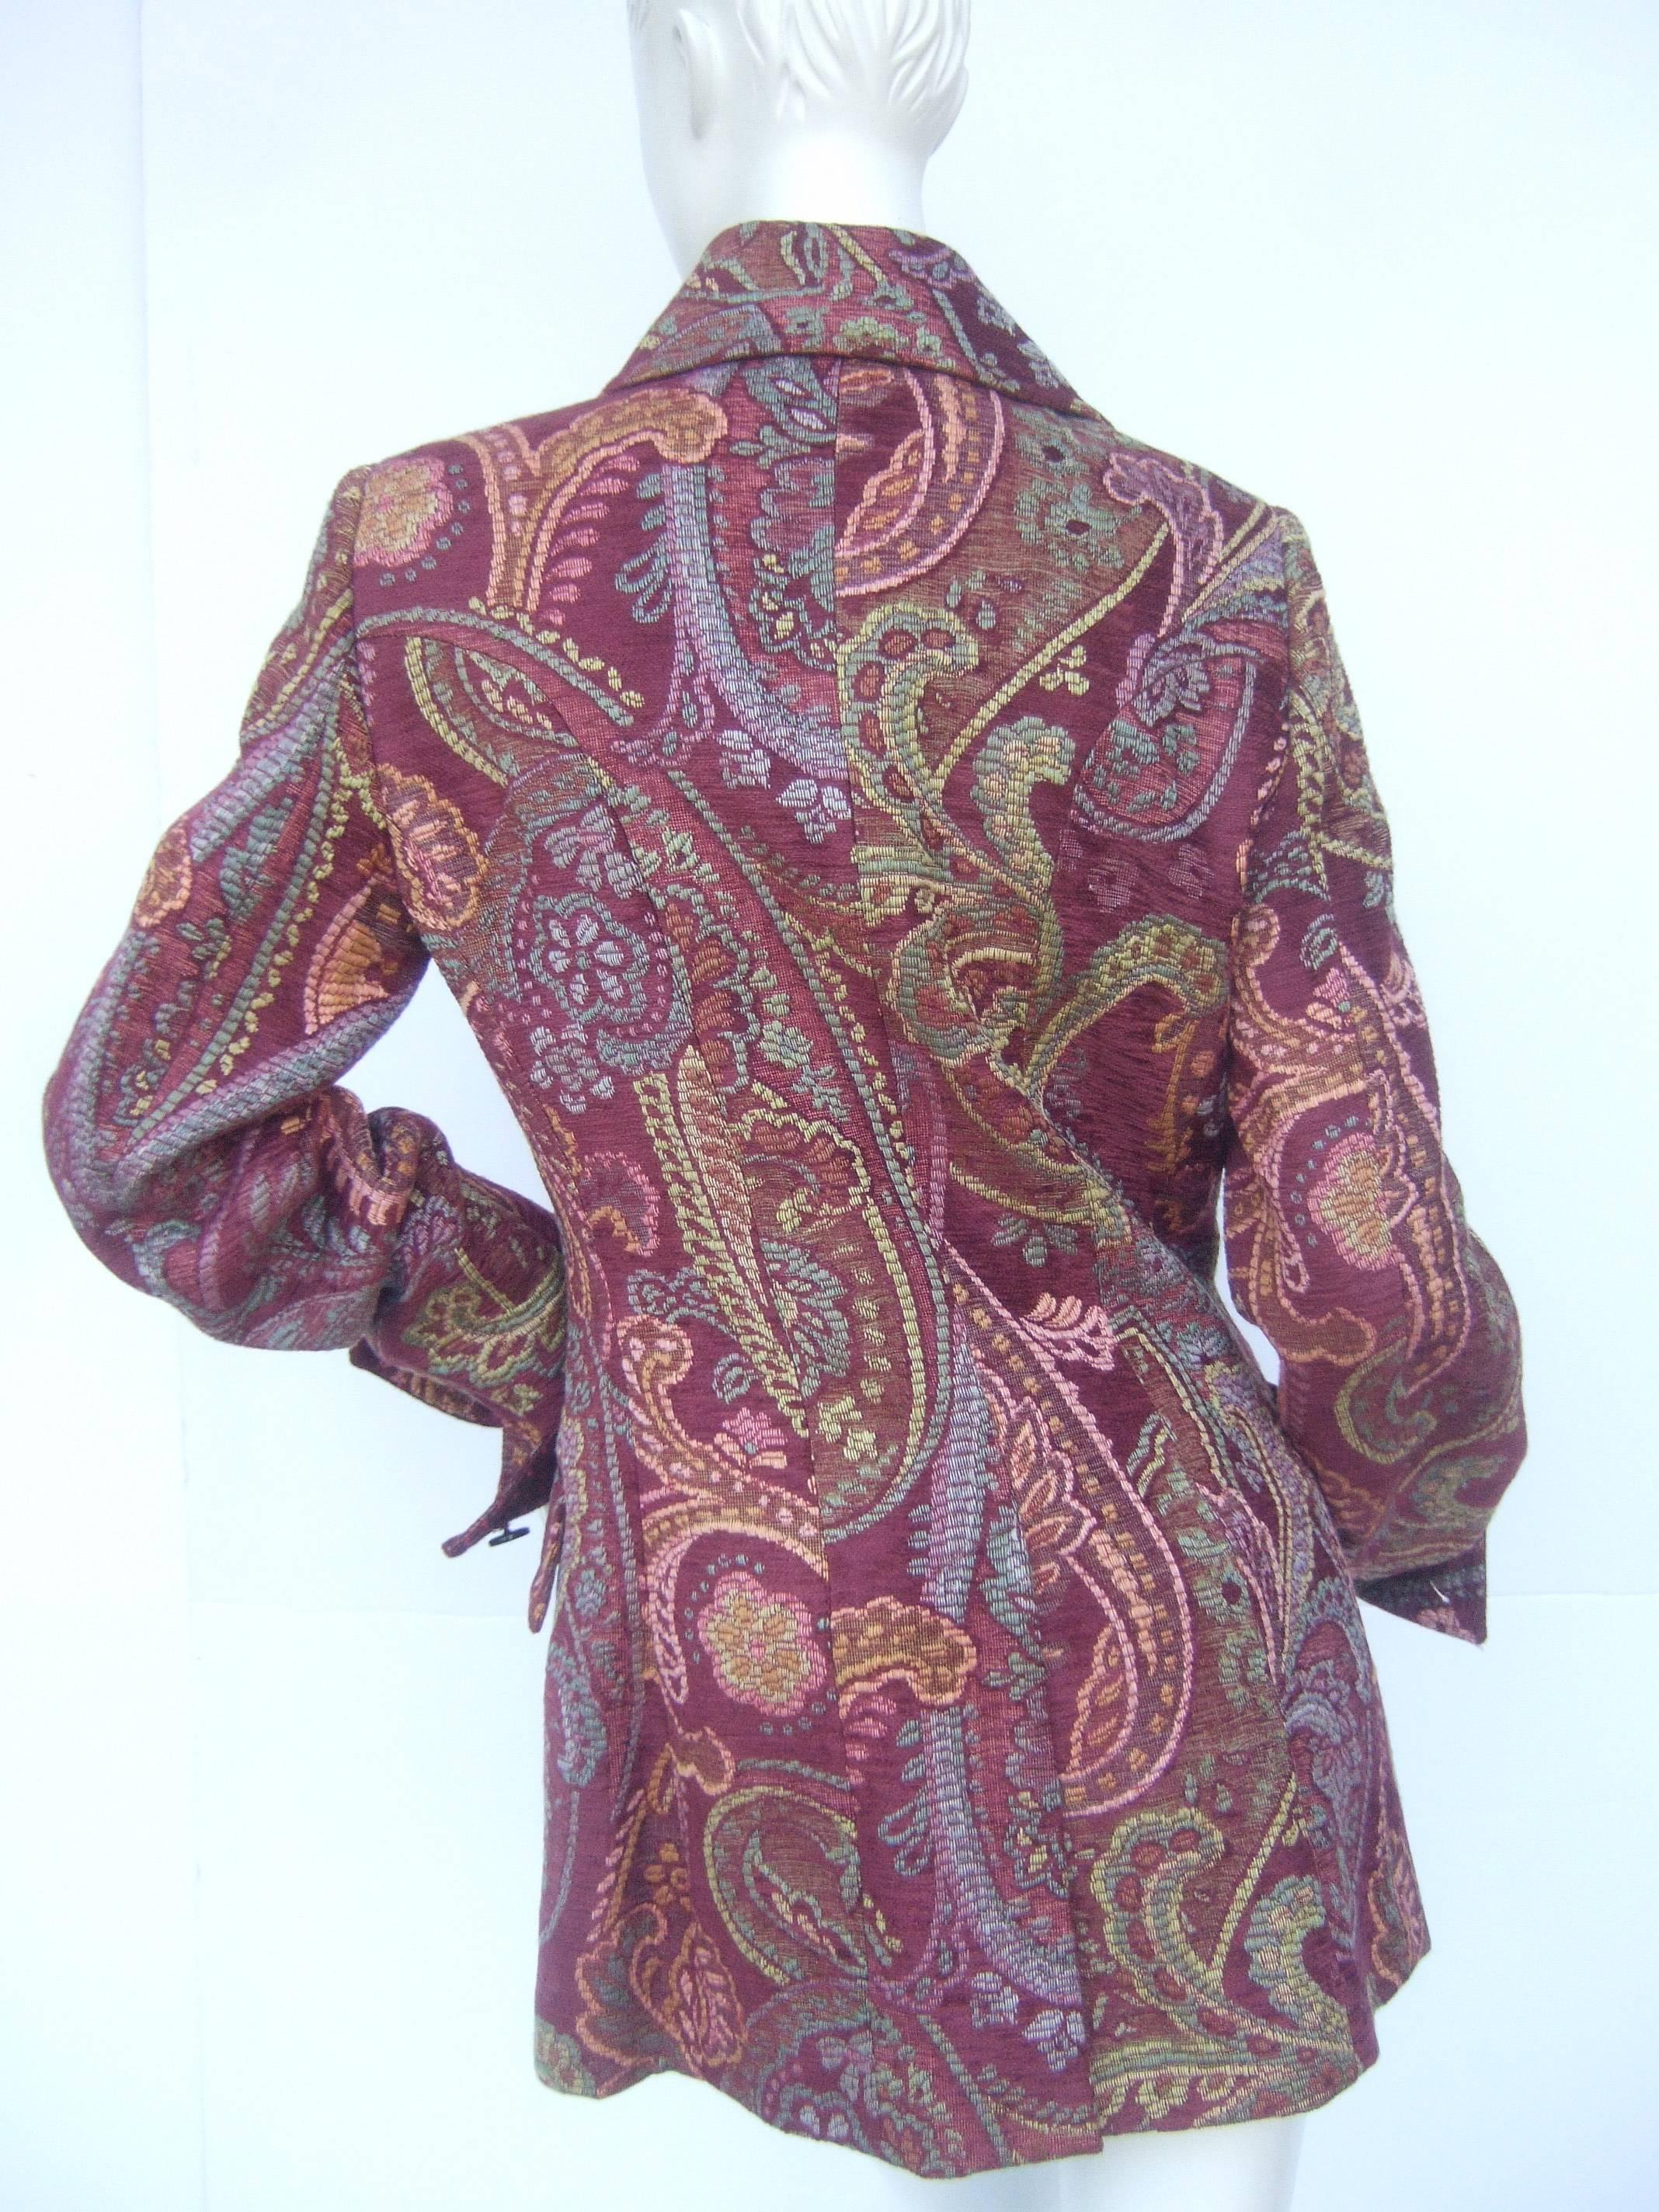 Etro Burgundy Paisley Tapestry Jacket Size 44 In Excellent Condition For Sale In University City, MO